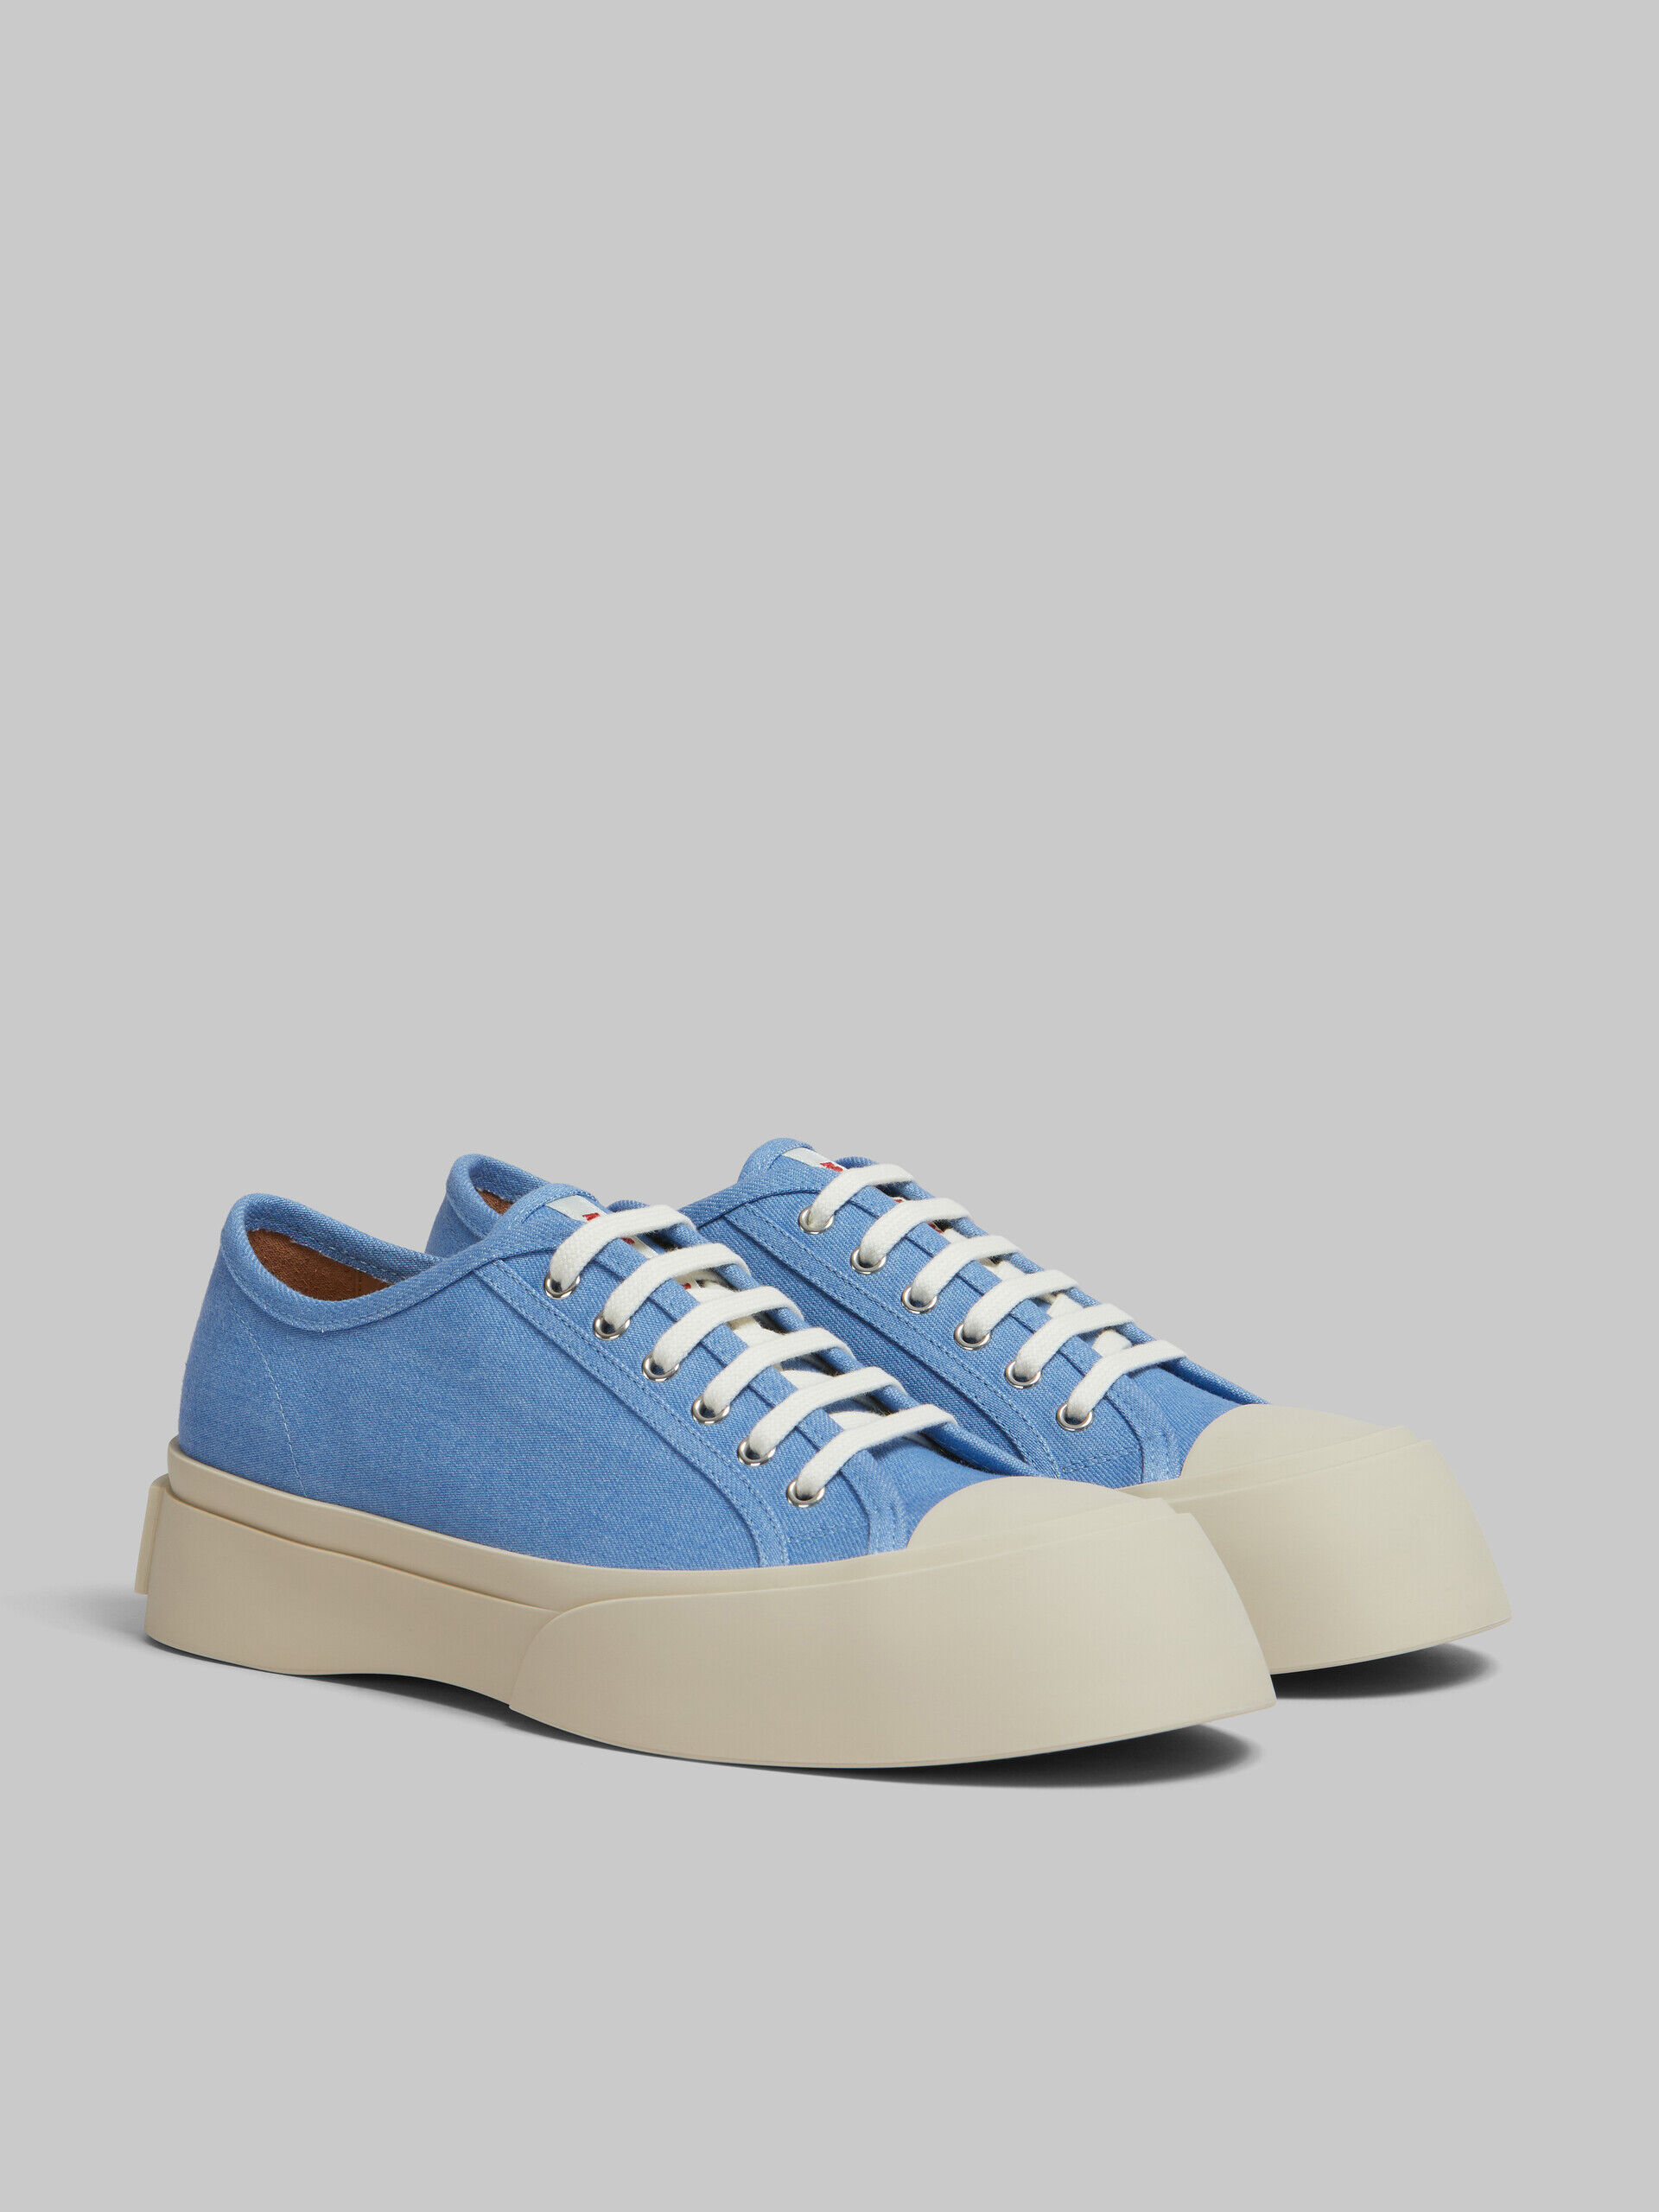 Marni Pablo leather sneakers - Blue